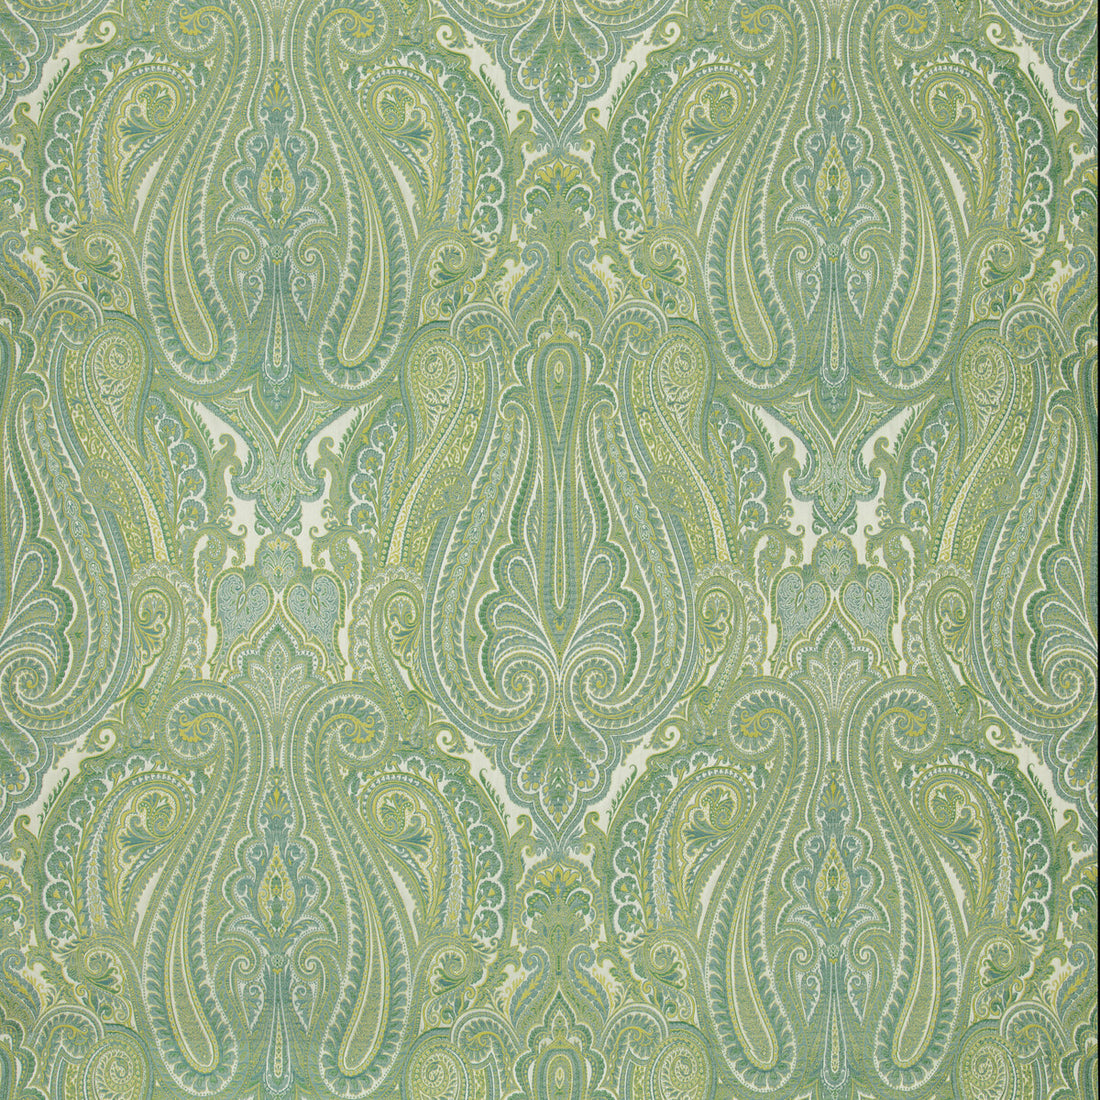 Aoria Paisley fabric in aqua/green color - pattern 8018113.133.0 - by Brunschwig &amp; Fils in the Baret collection